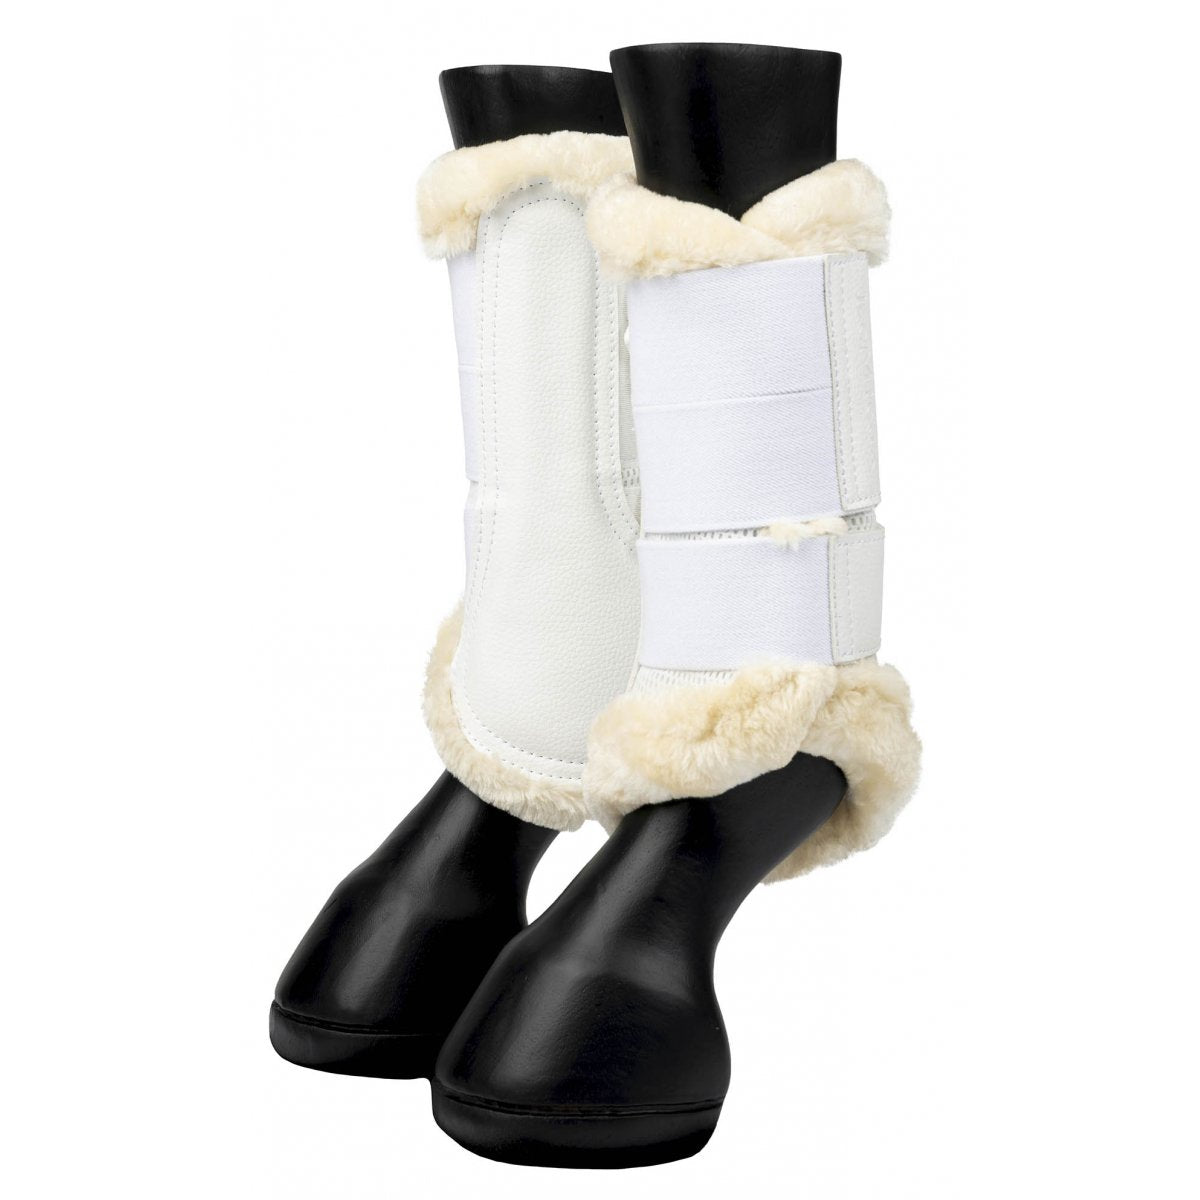 LeMieux Fleece Edge Mesh Brushing Boots-Southern Sport Horses-The Equestrian